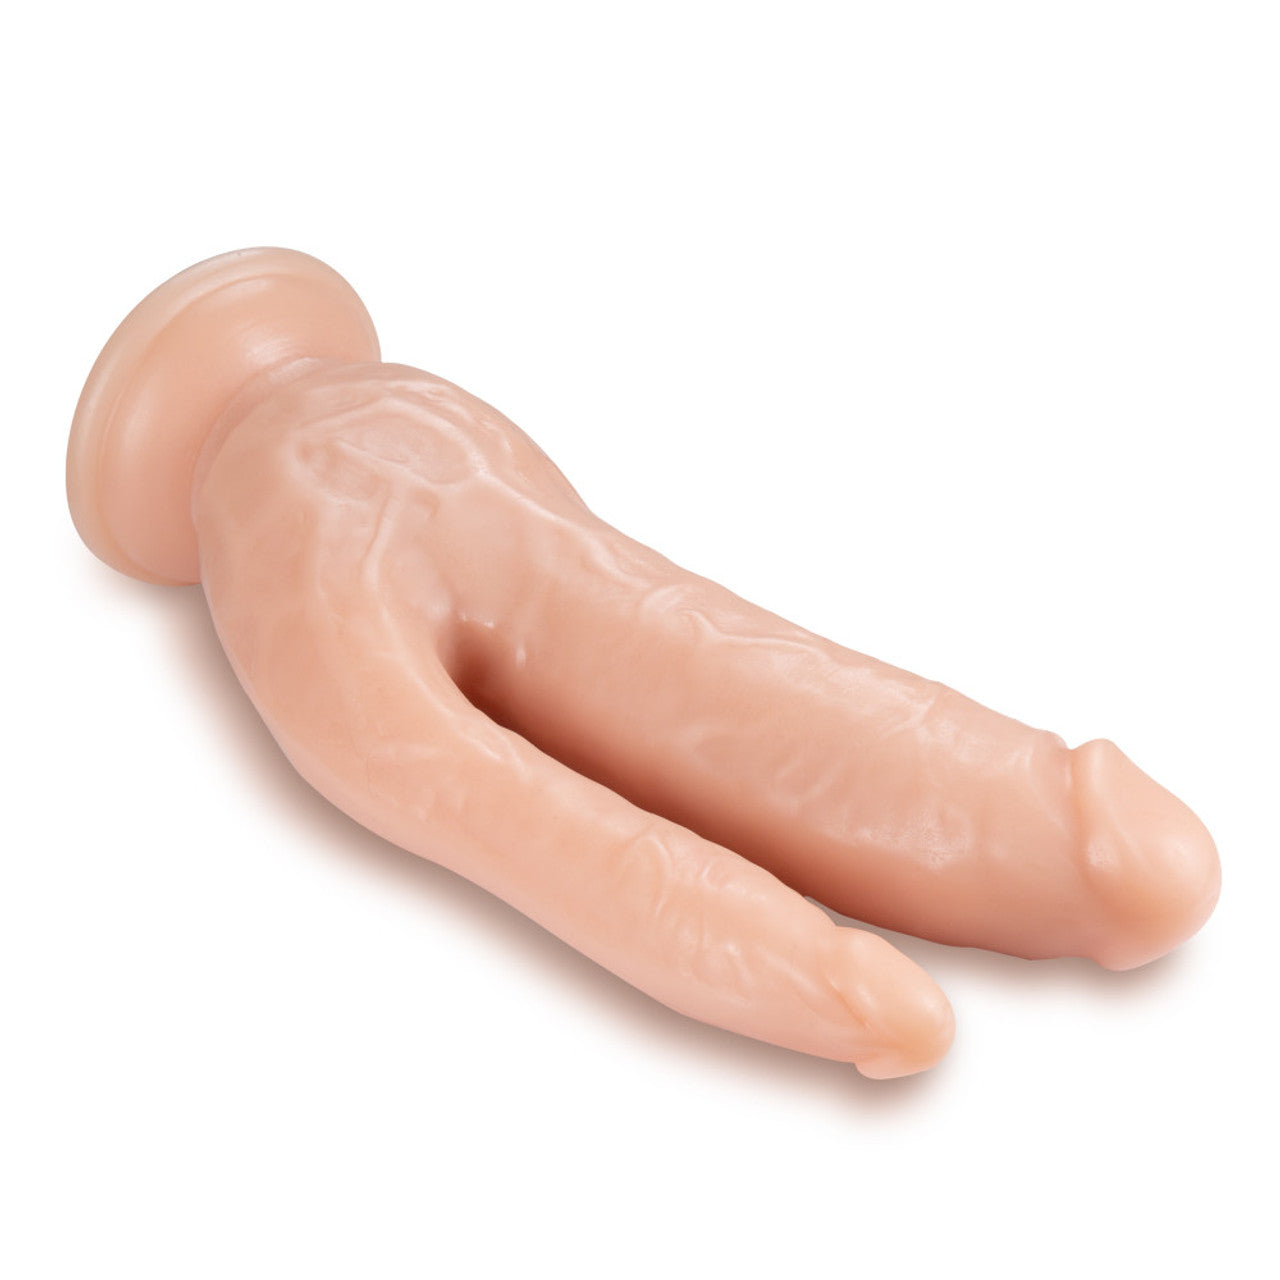 Dr. Skin 8 Inch DP Cock - Vanilla - Thorn & Feather Sex Toy Canada